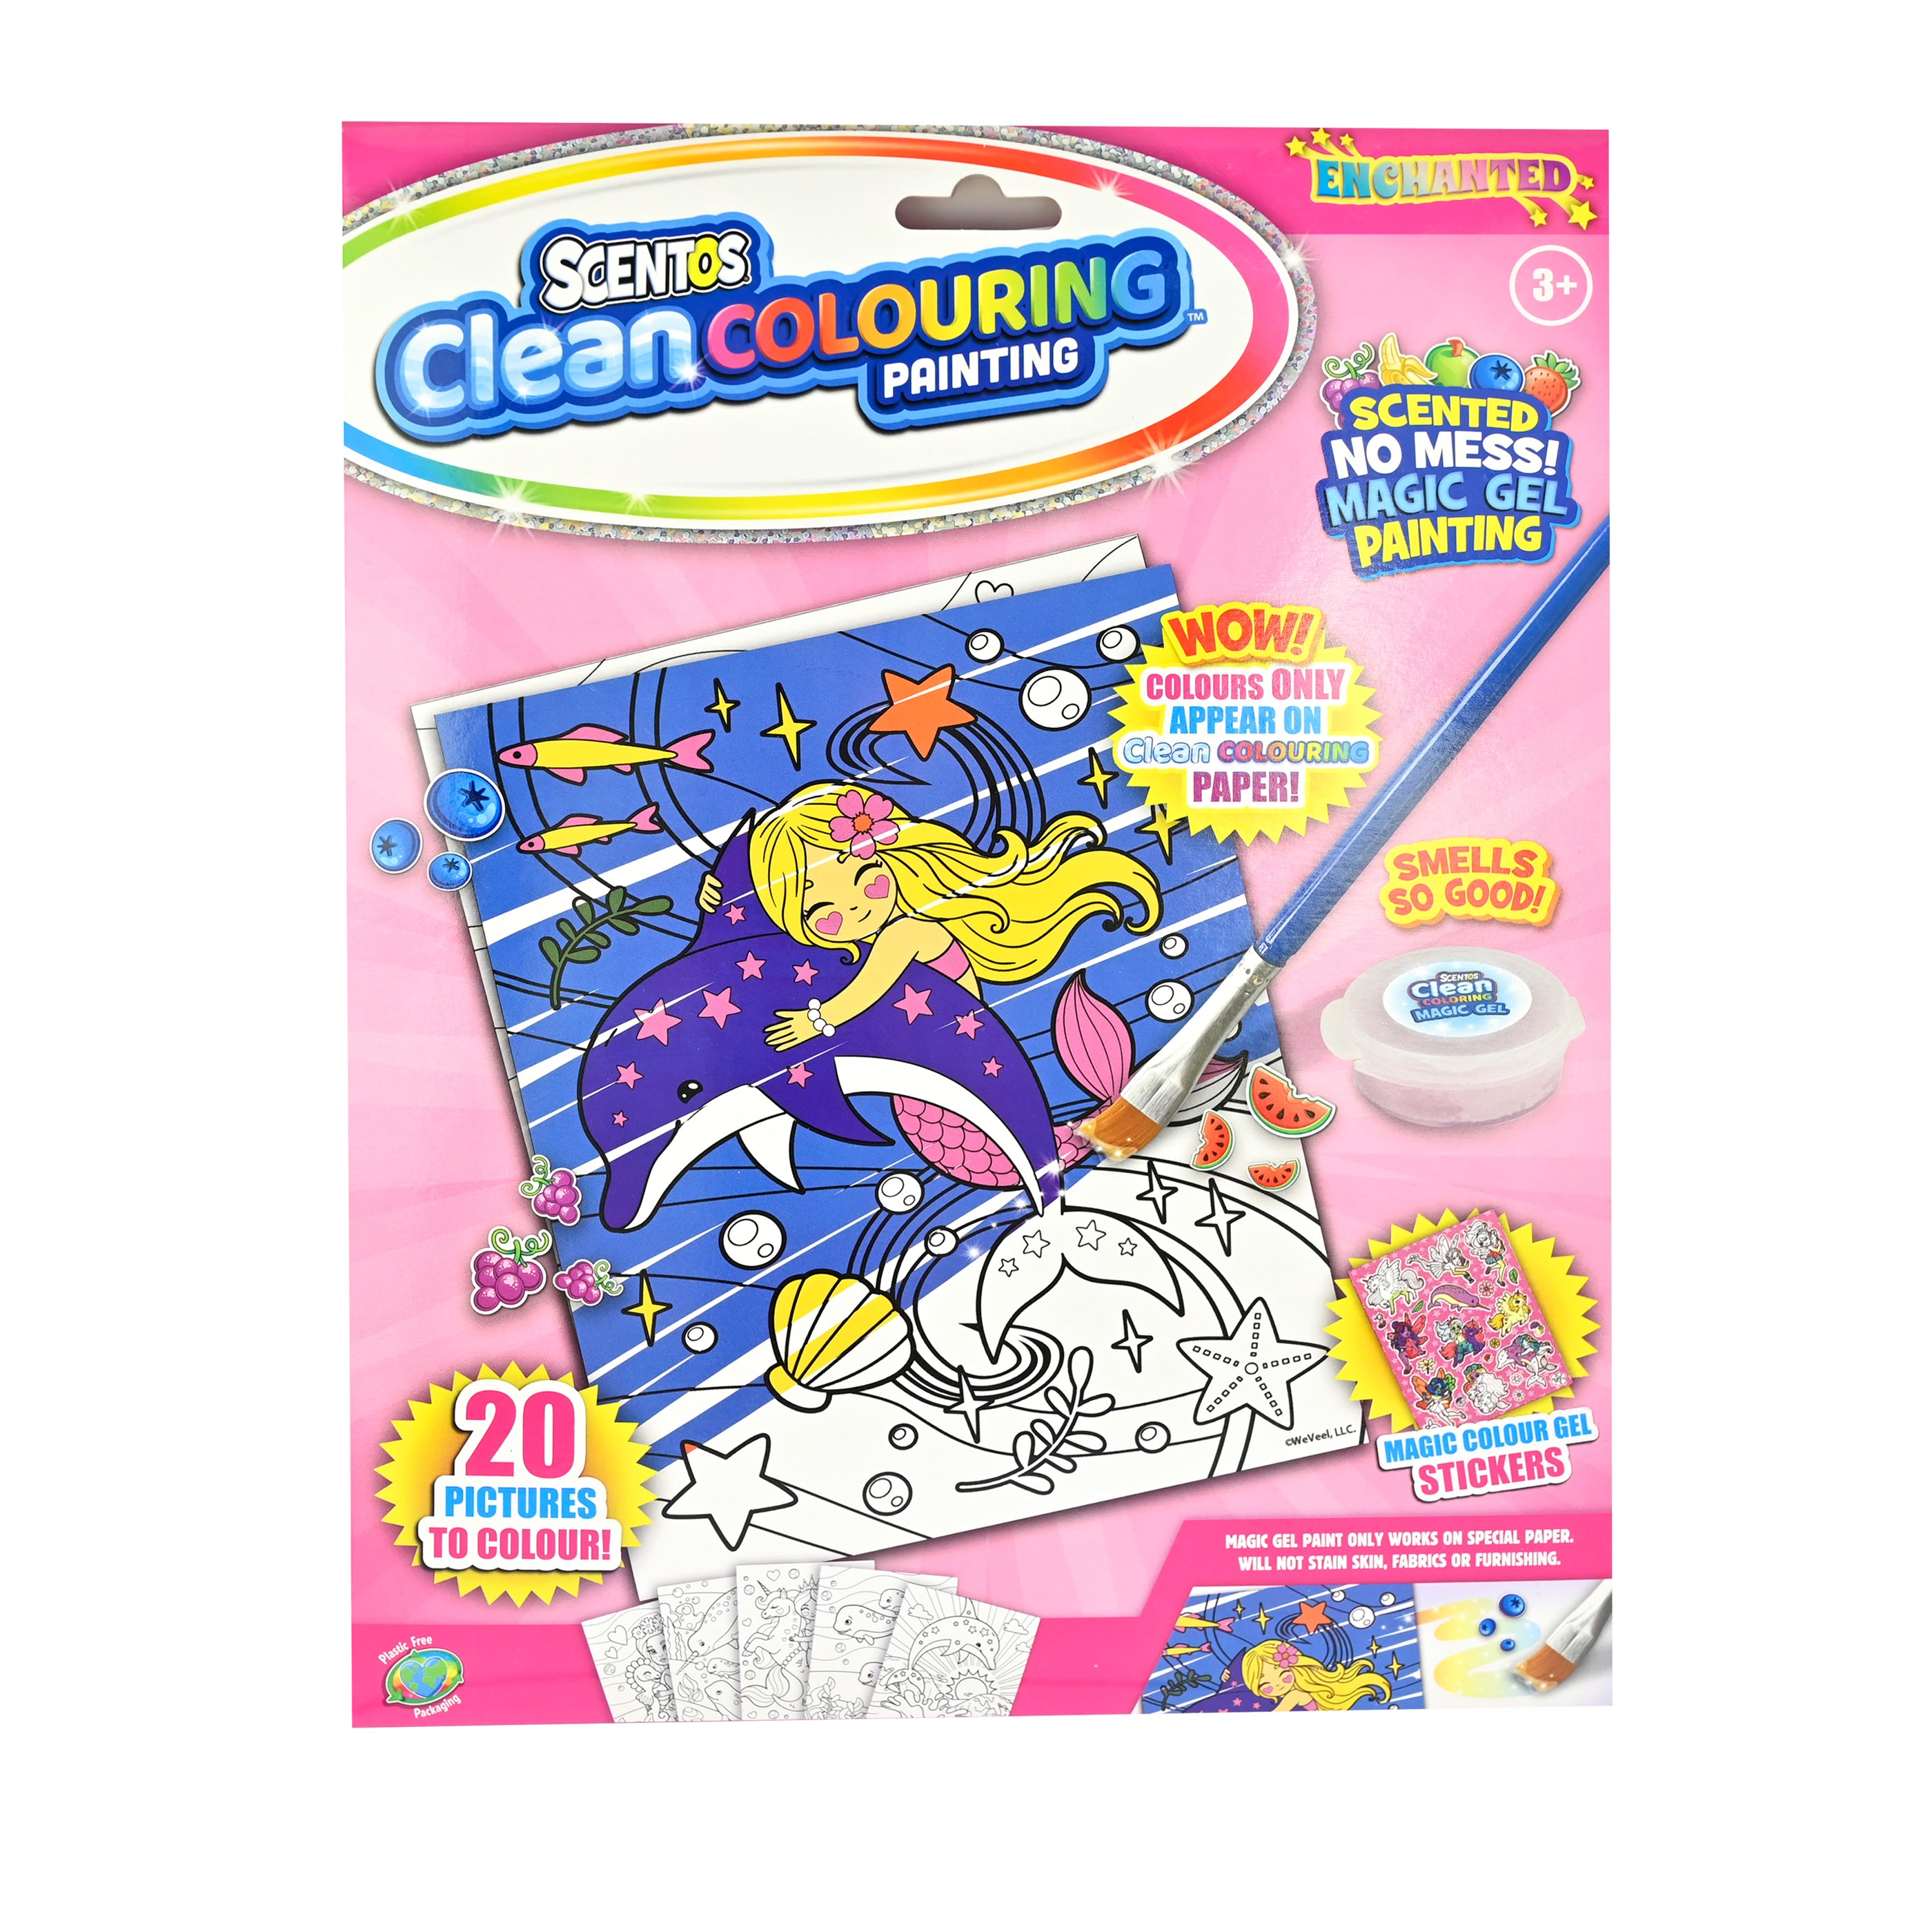 Scentos Clean Colouring Painting - Enchanted